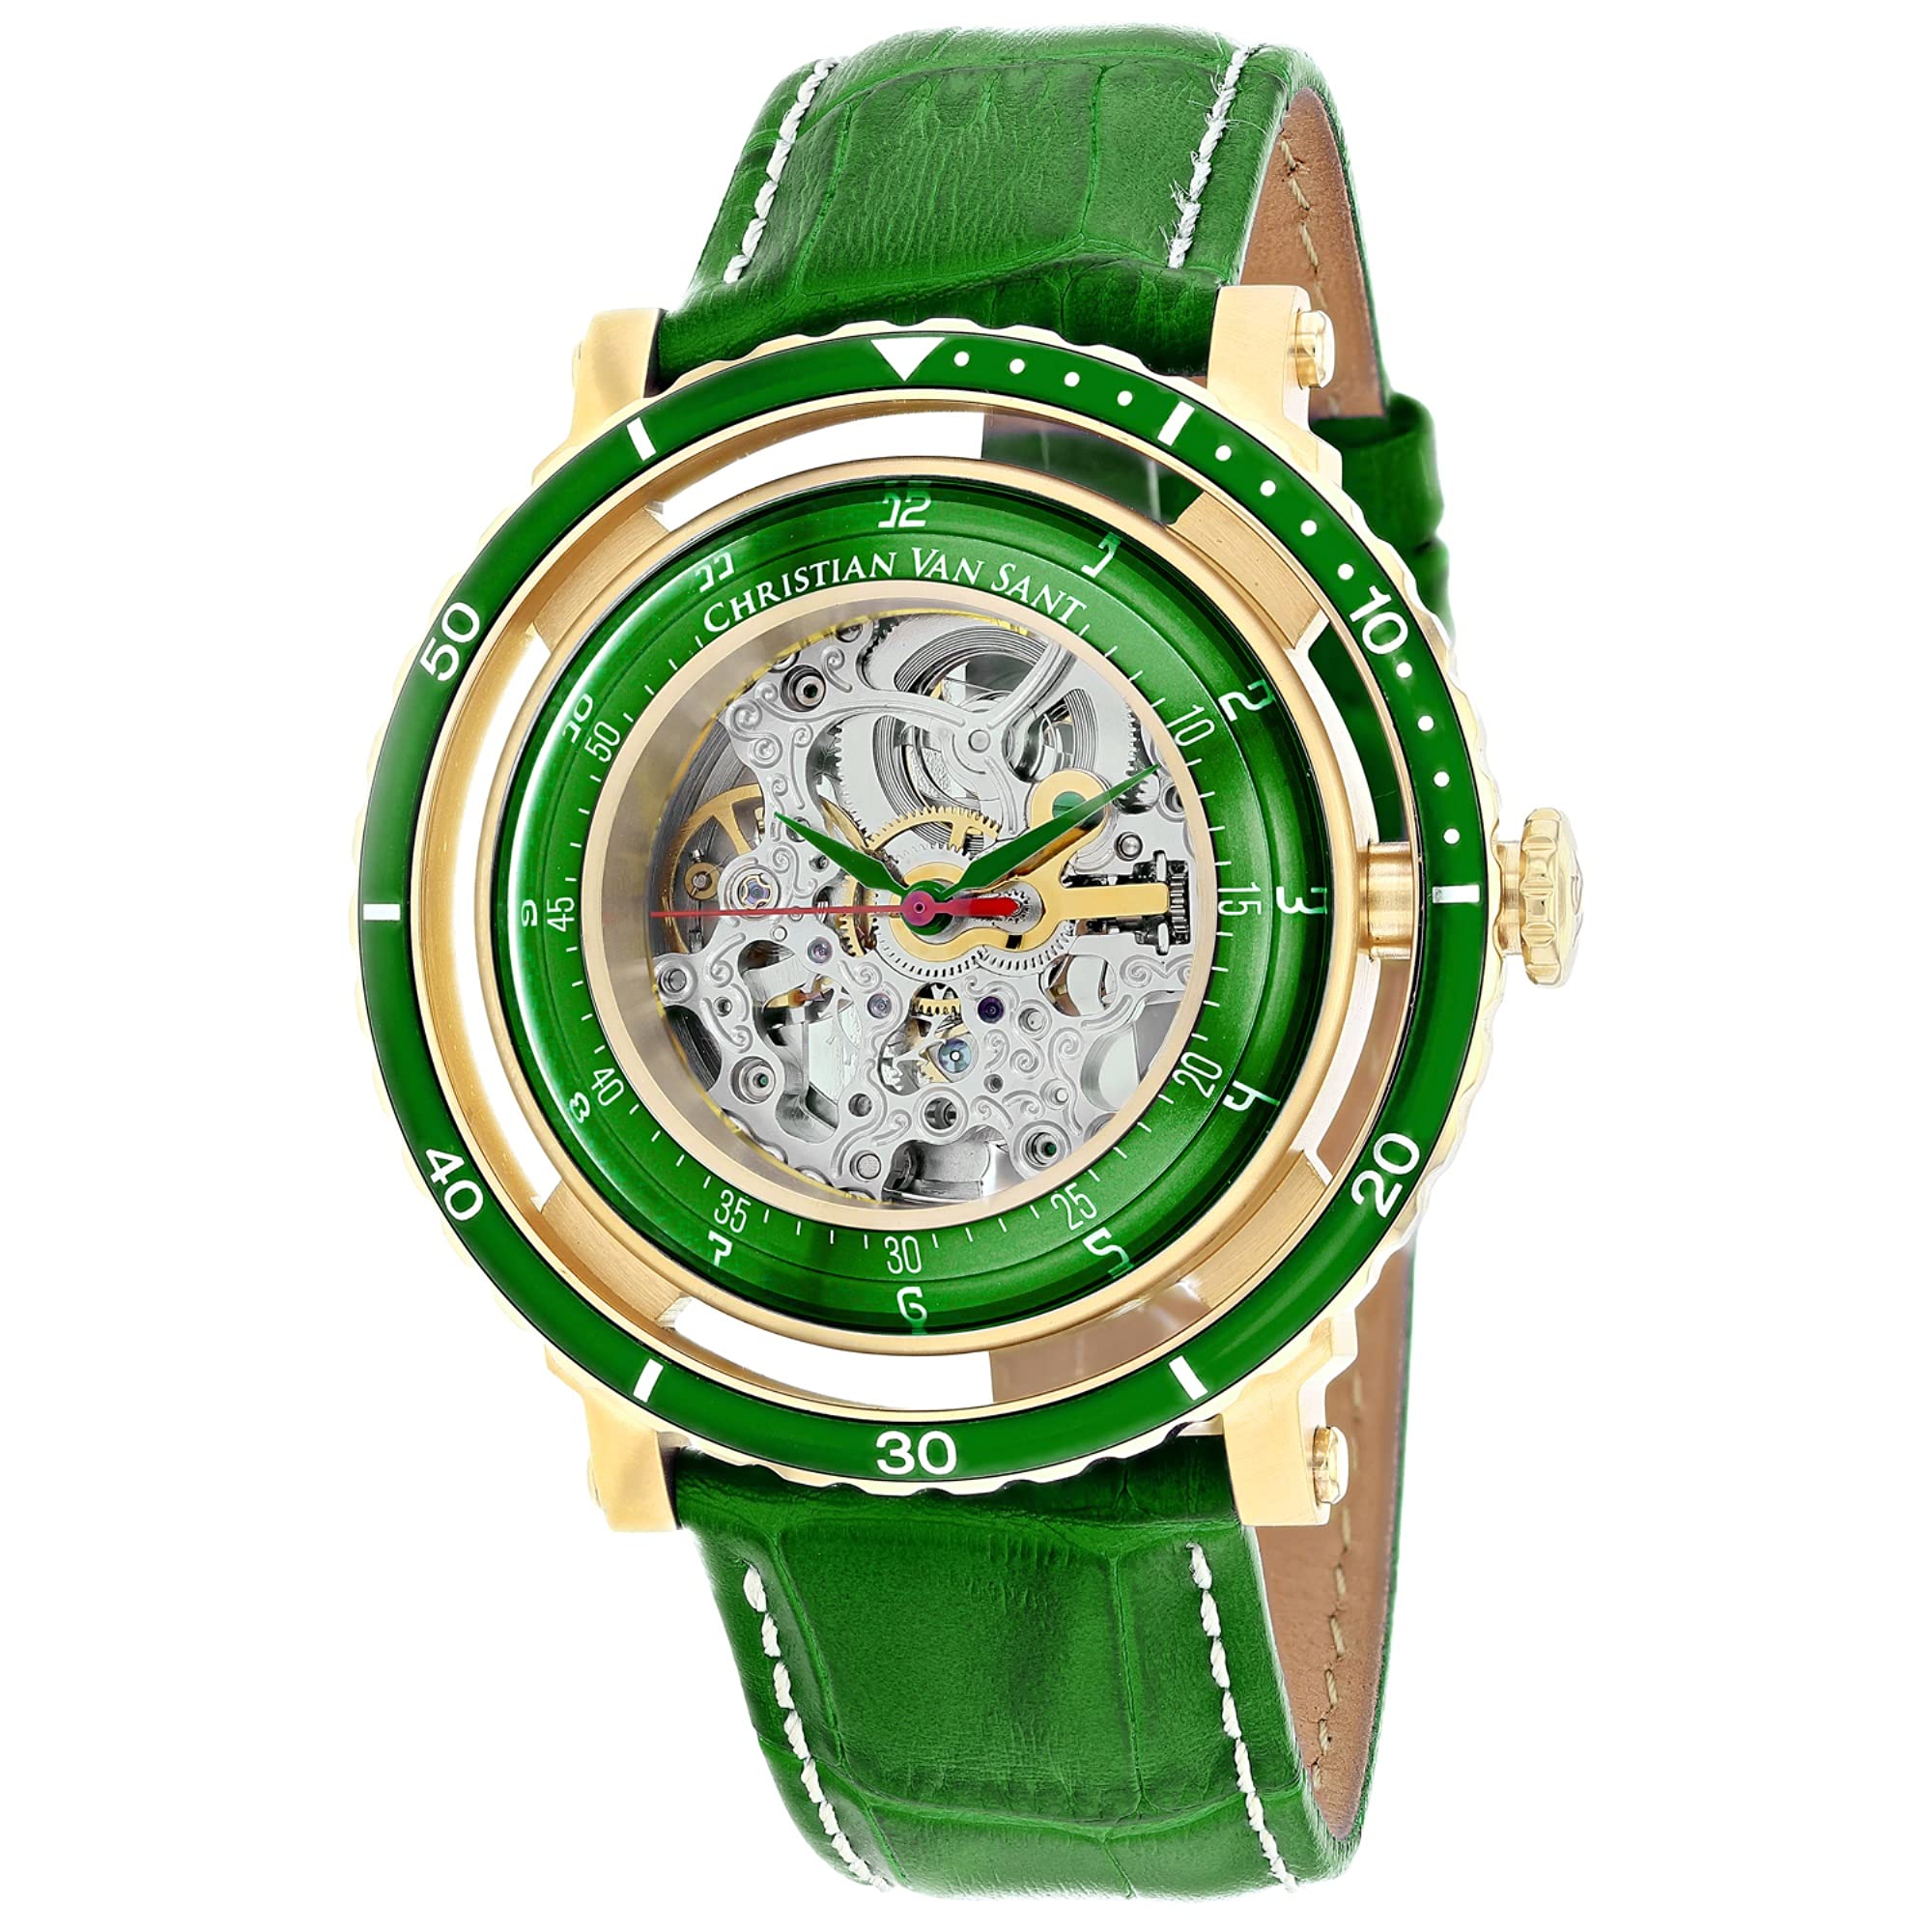 Christian Van Sant Men's Dome Stainless Steel Automatic Watch with Leather Strap, Green, 21 (Model: CV0751)